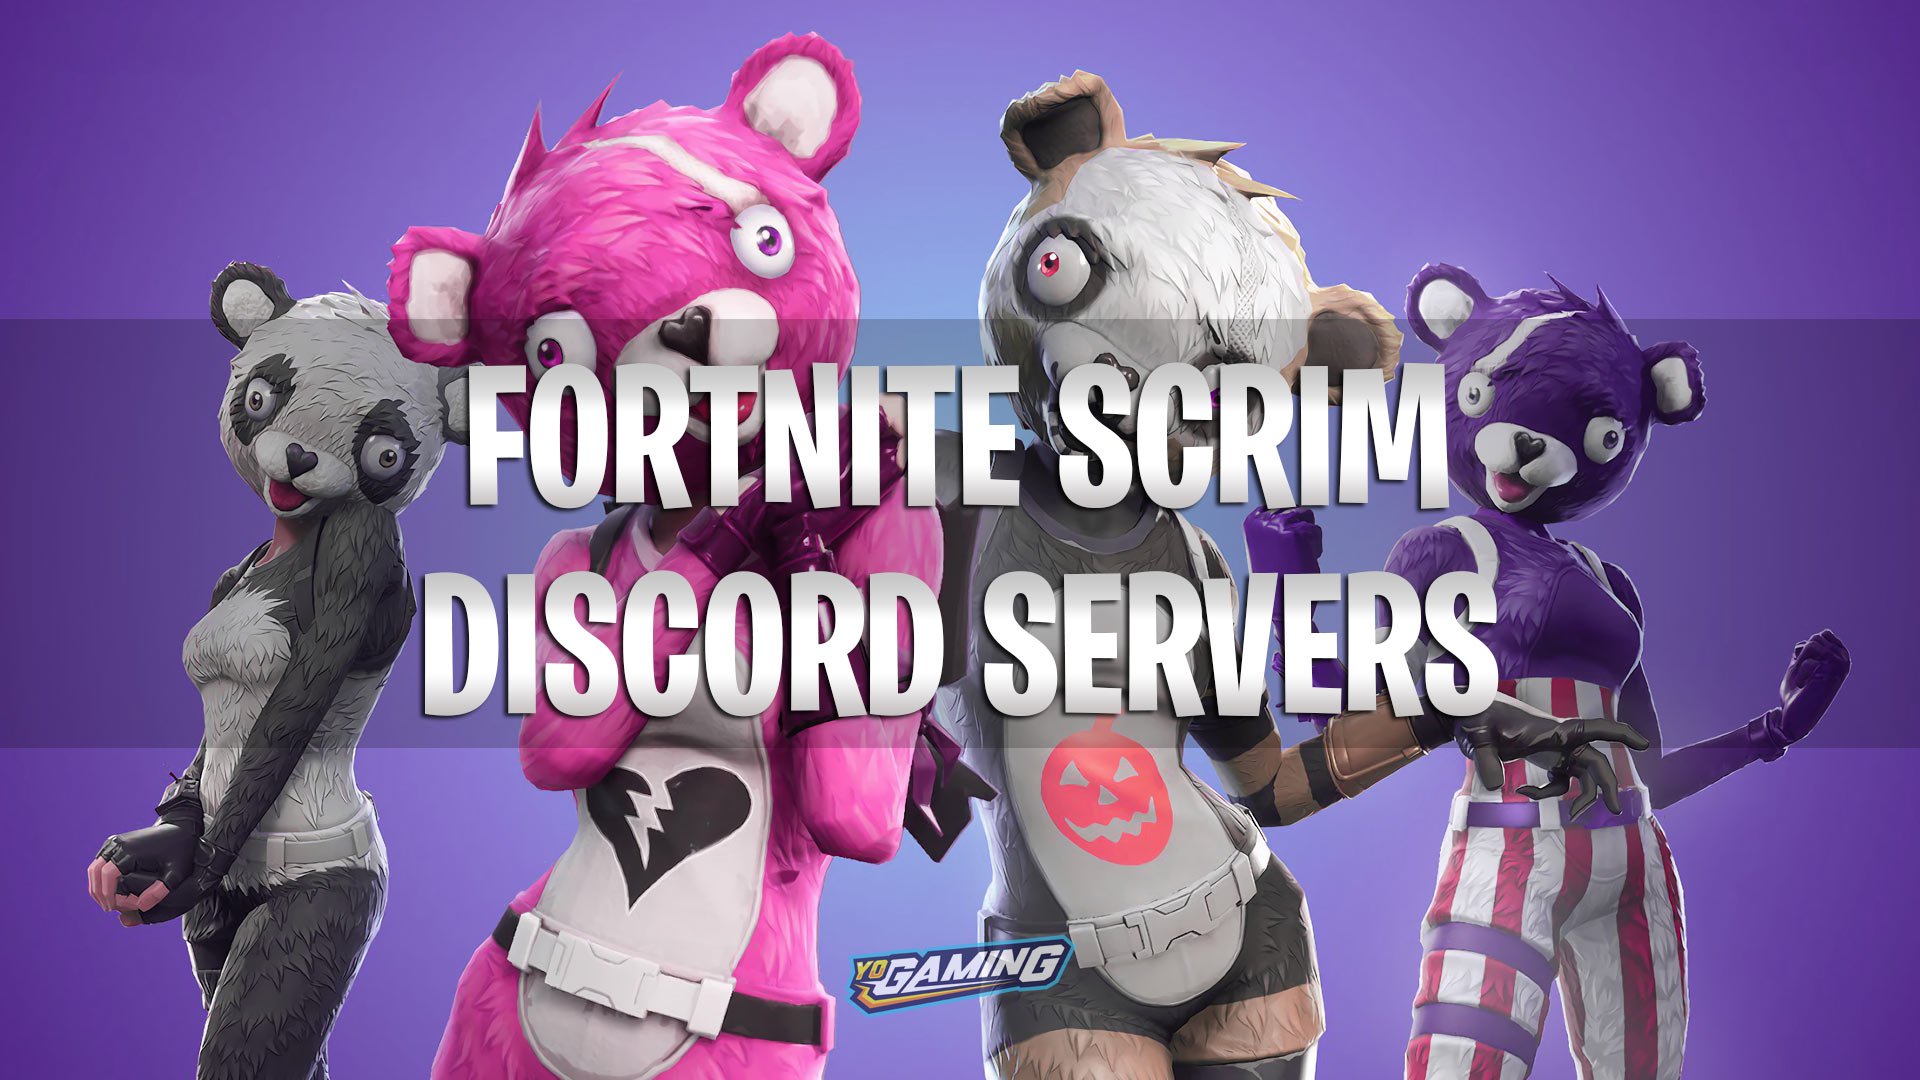 list of fortnite scrim discord servers pc xbox ps4 updated april 2019 - ps4 and xbox fortnite scrims